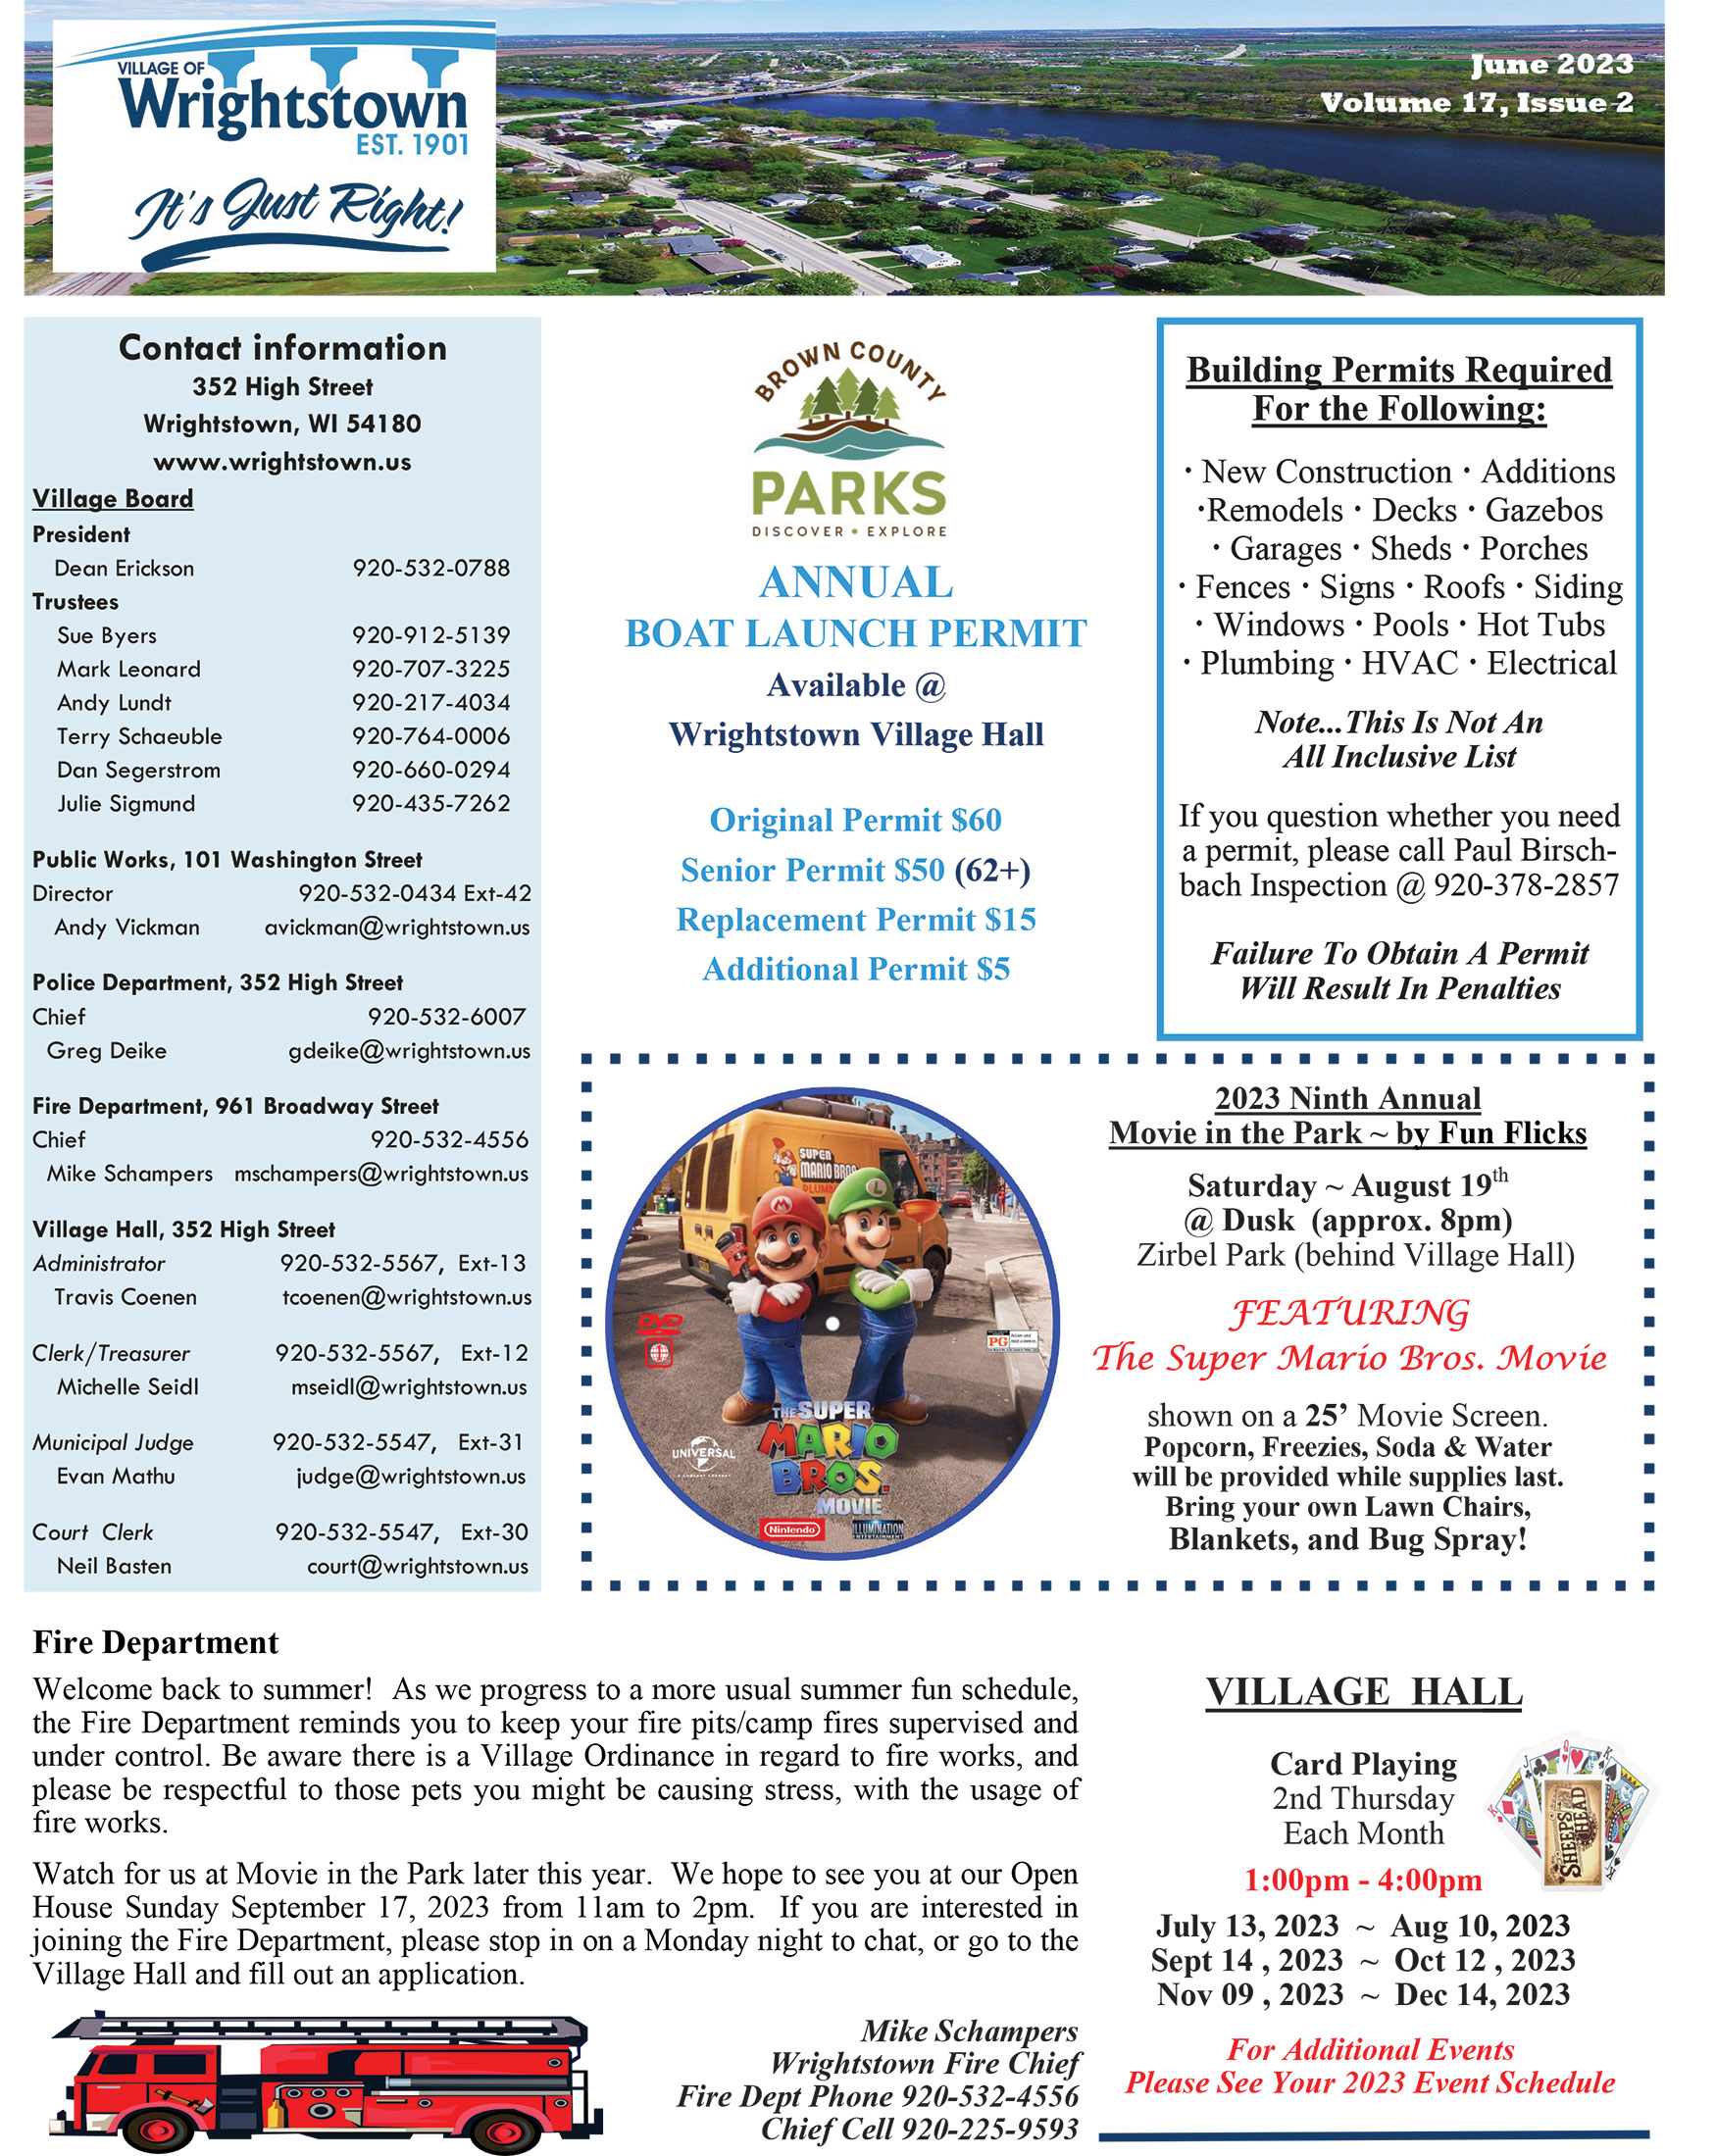 village of wrightstown wisconsin calendar, events calendar, recycling, village board meetings, planning meetings, elections, village holidays, utility bill